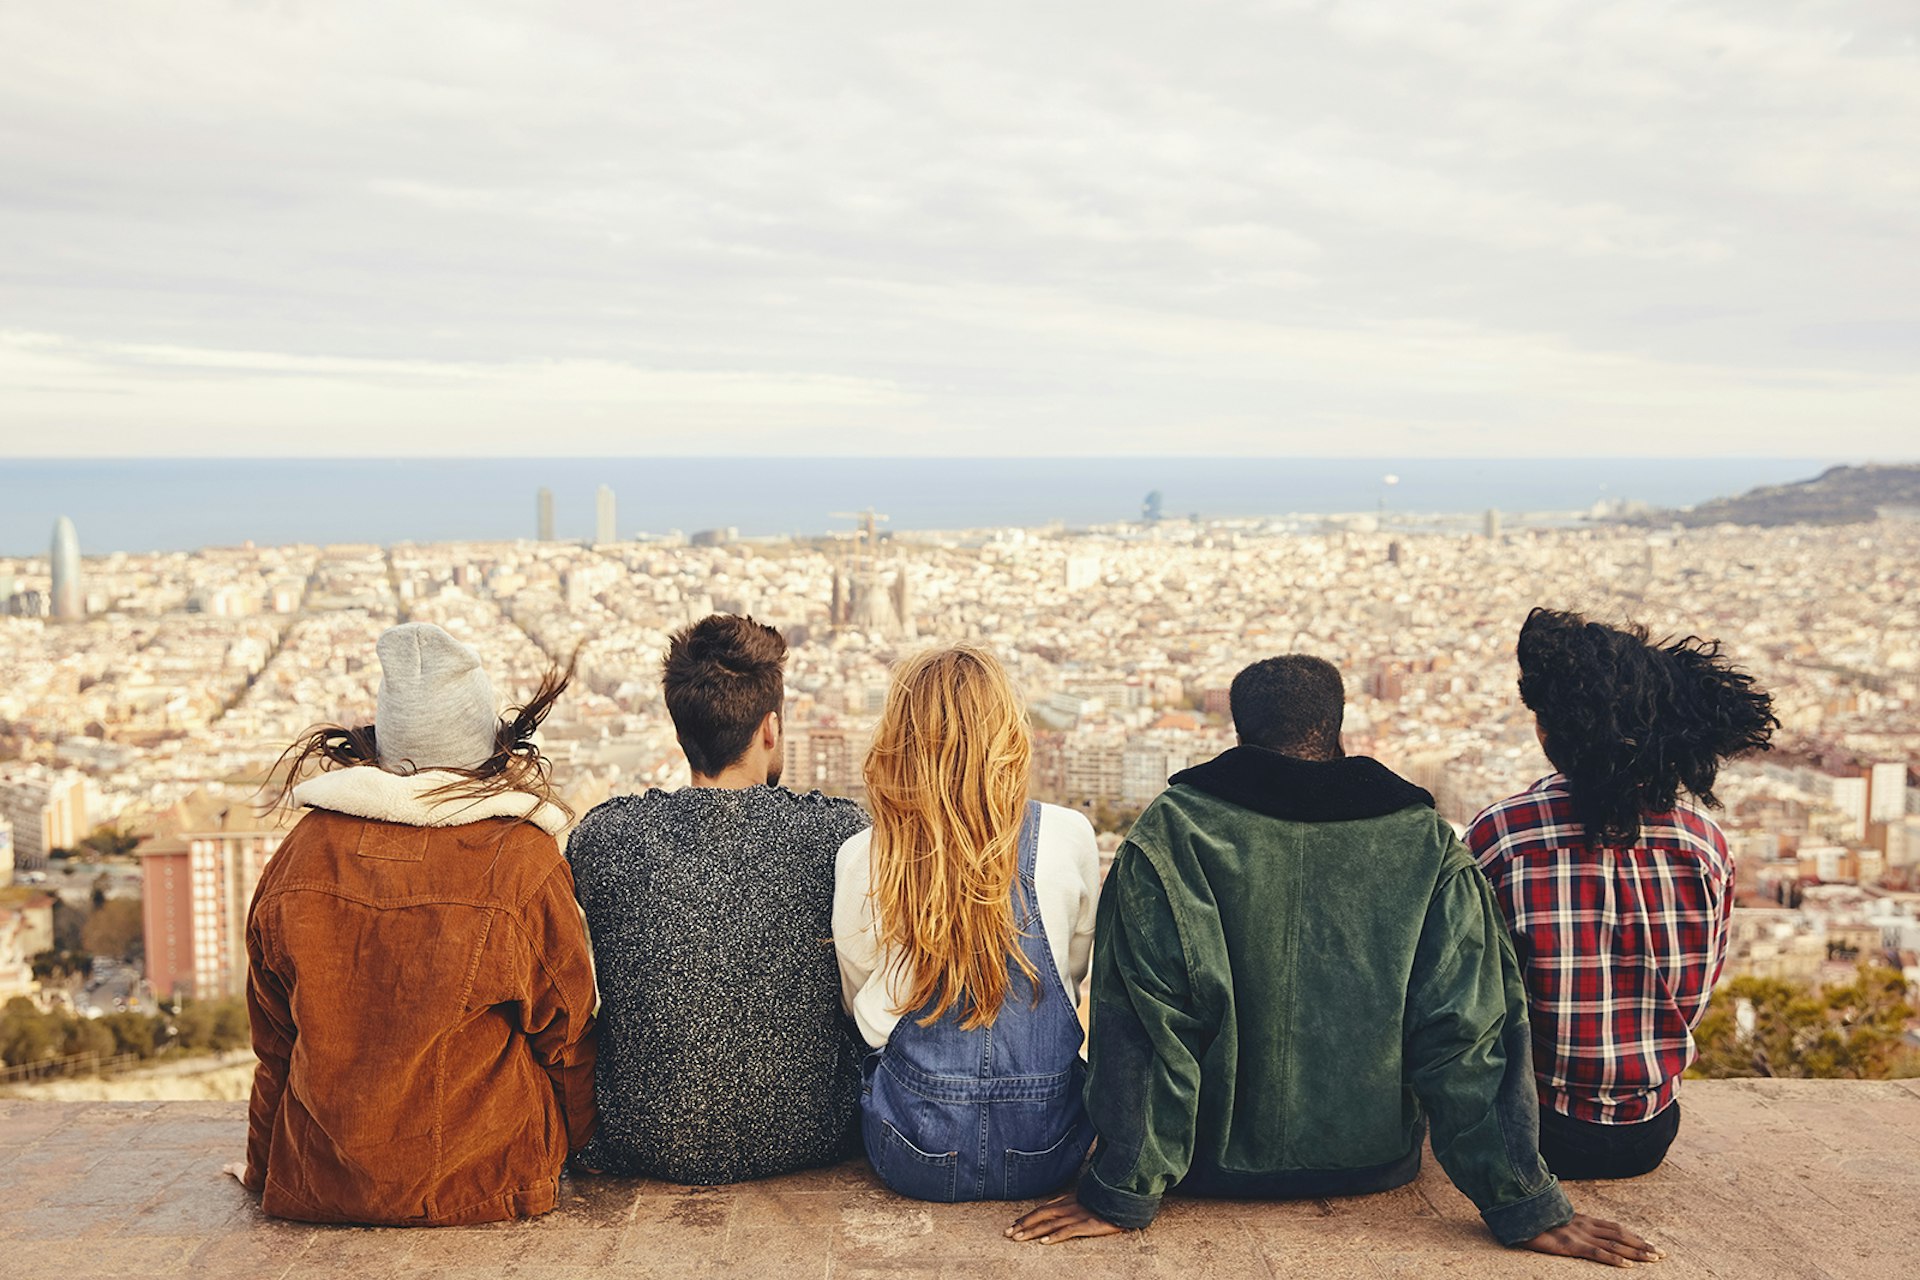 A group of young people looking out over a panorama of a city © Nomad / Getty Images